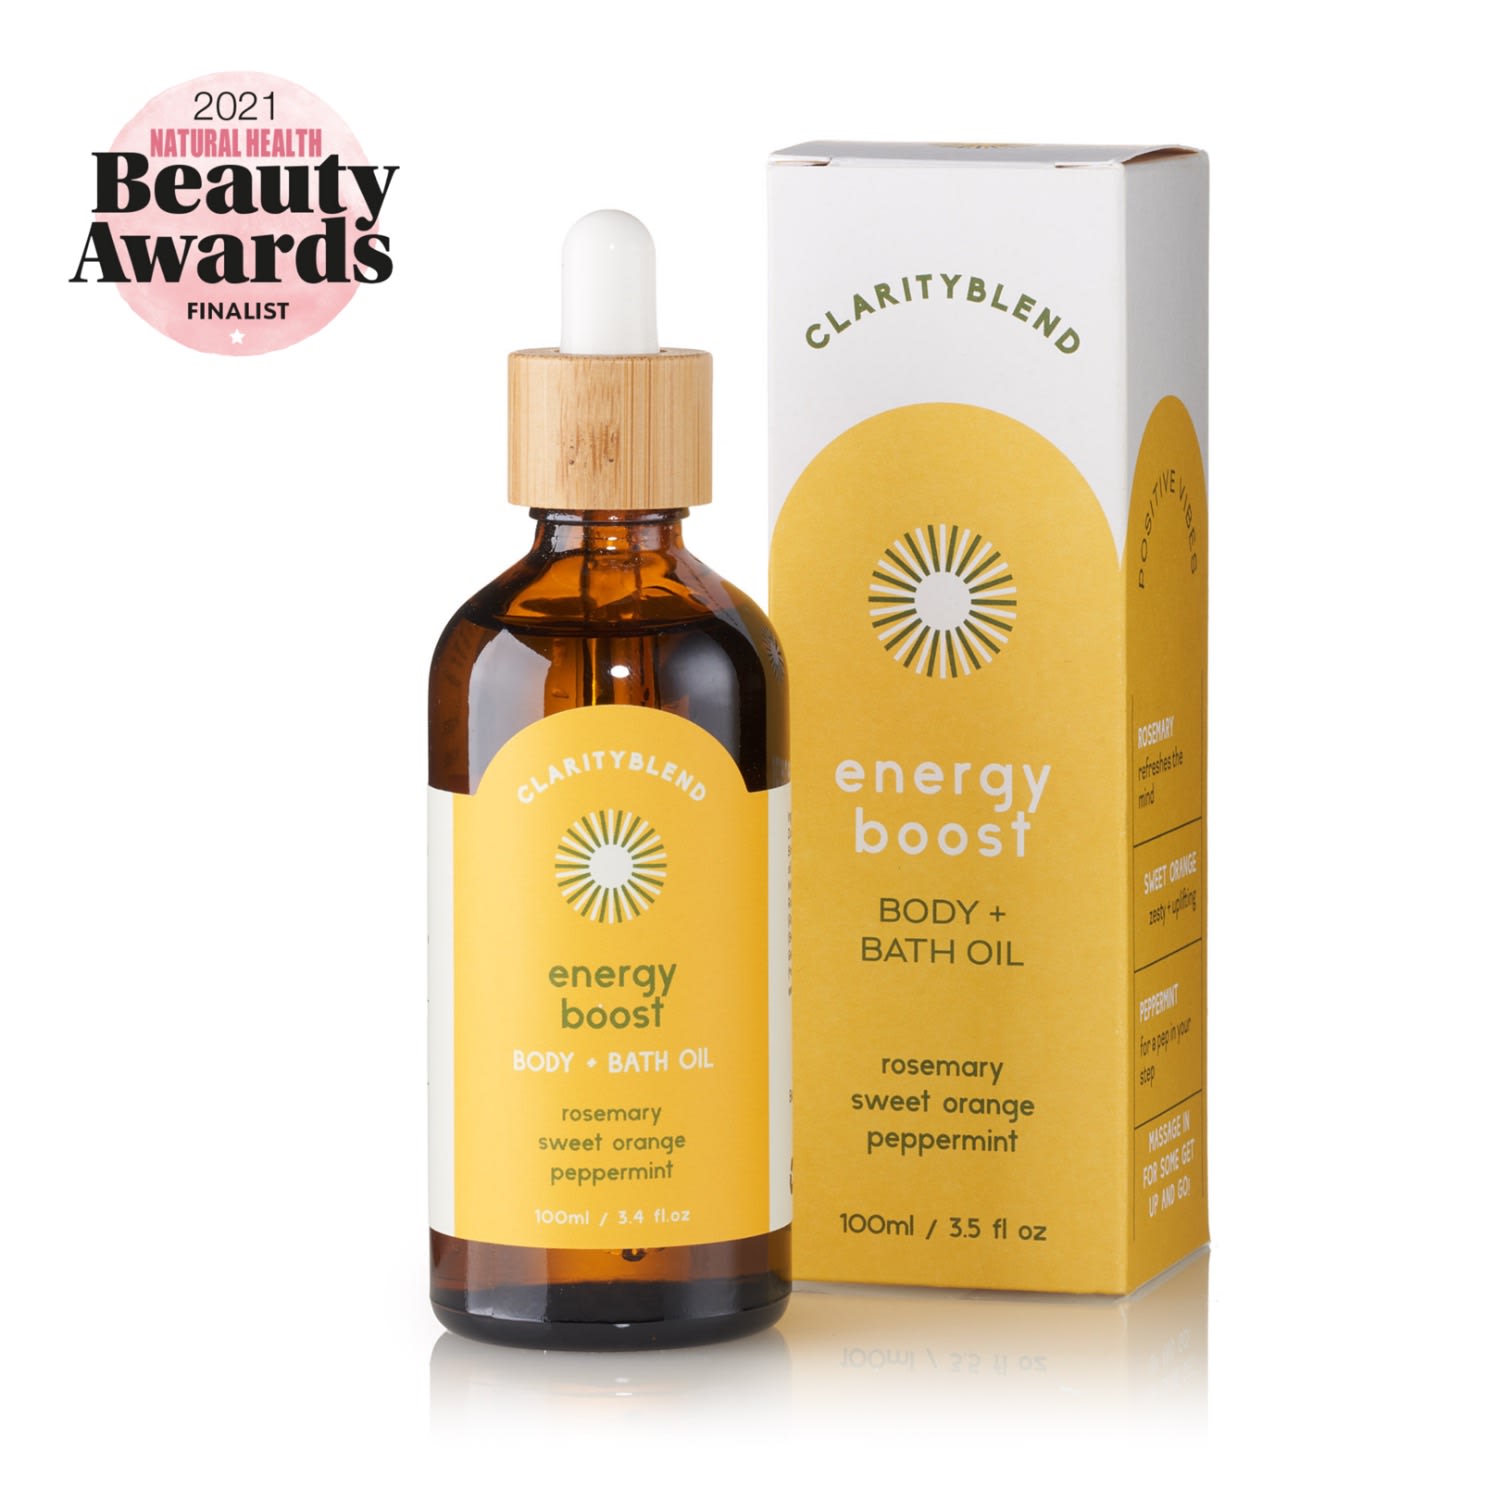 Energy Boost Bath & Body Oil Clarity Blend Aromatherapy